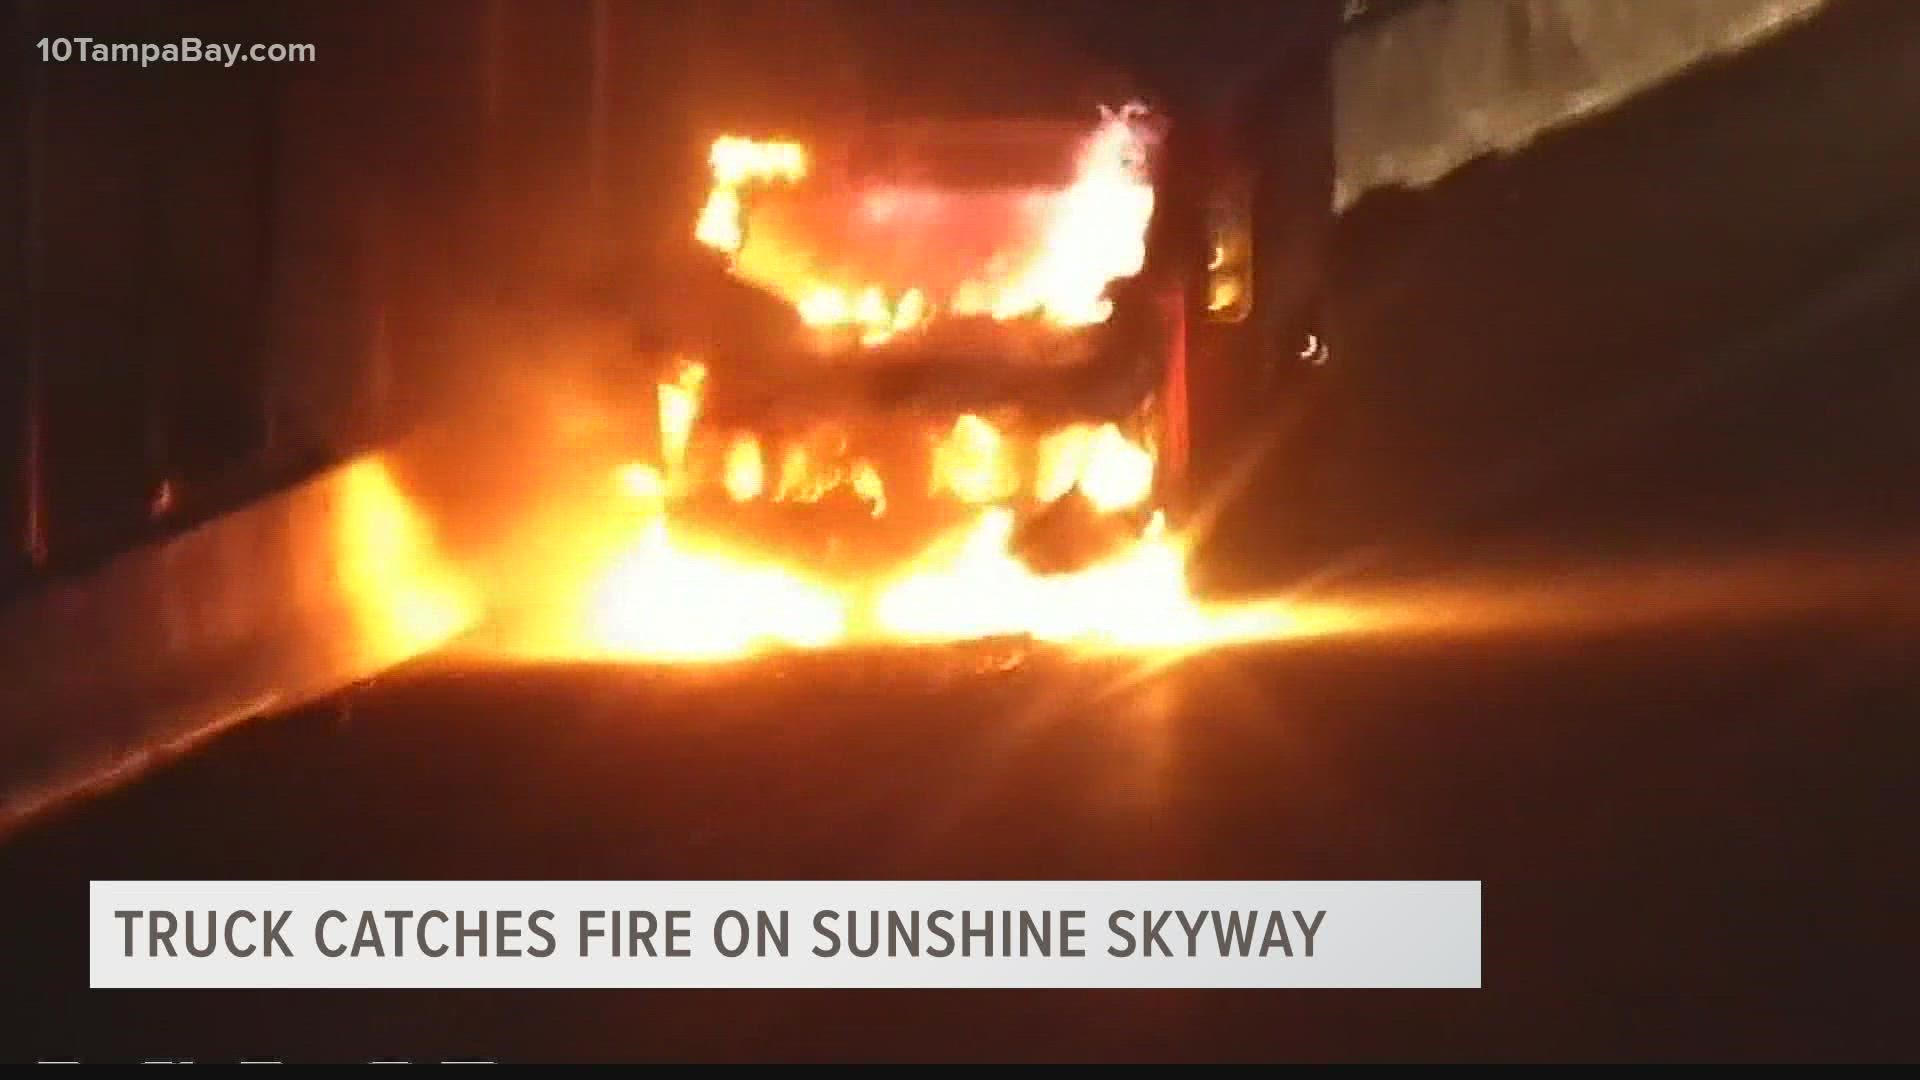 A Brinks truck caught fire Thursday night in the northbound lanes of the Sunshine Skyway Bridge.